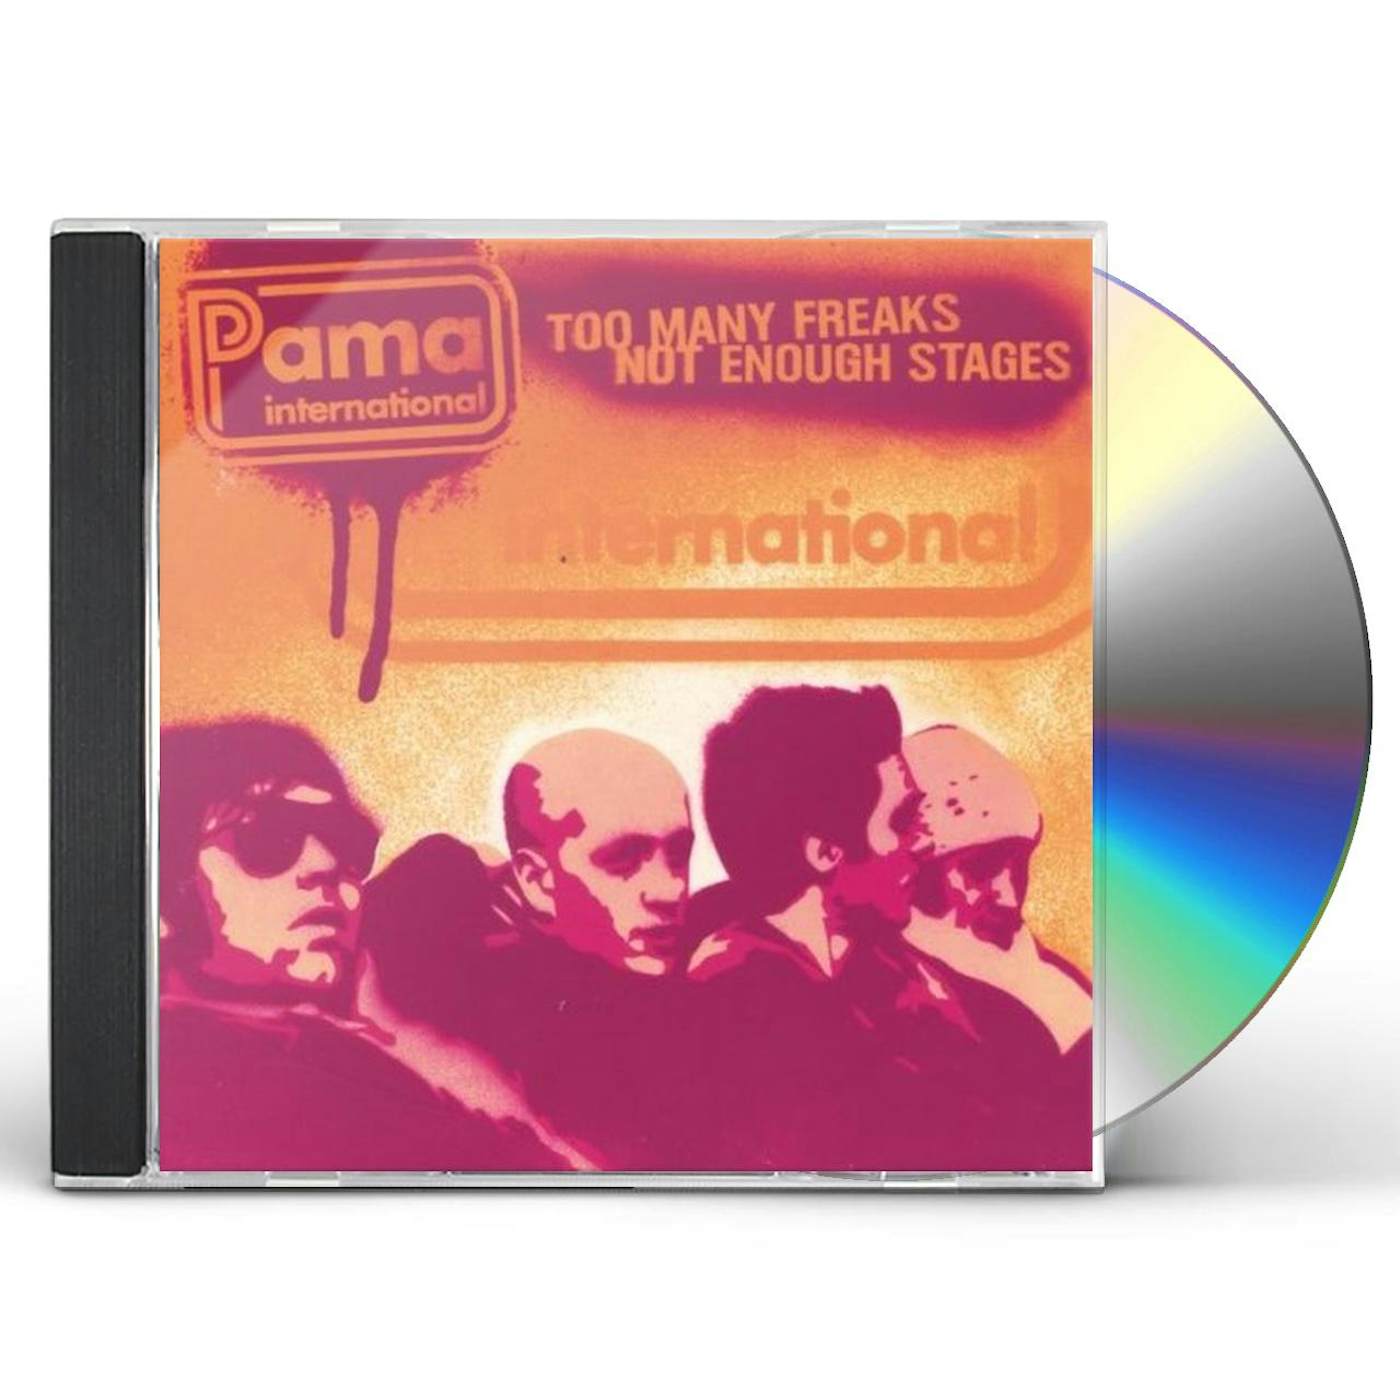 Pama International TOO MANY FREAKS NOT ENOUGH STAGES CD